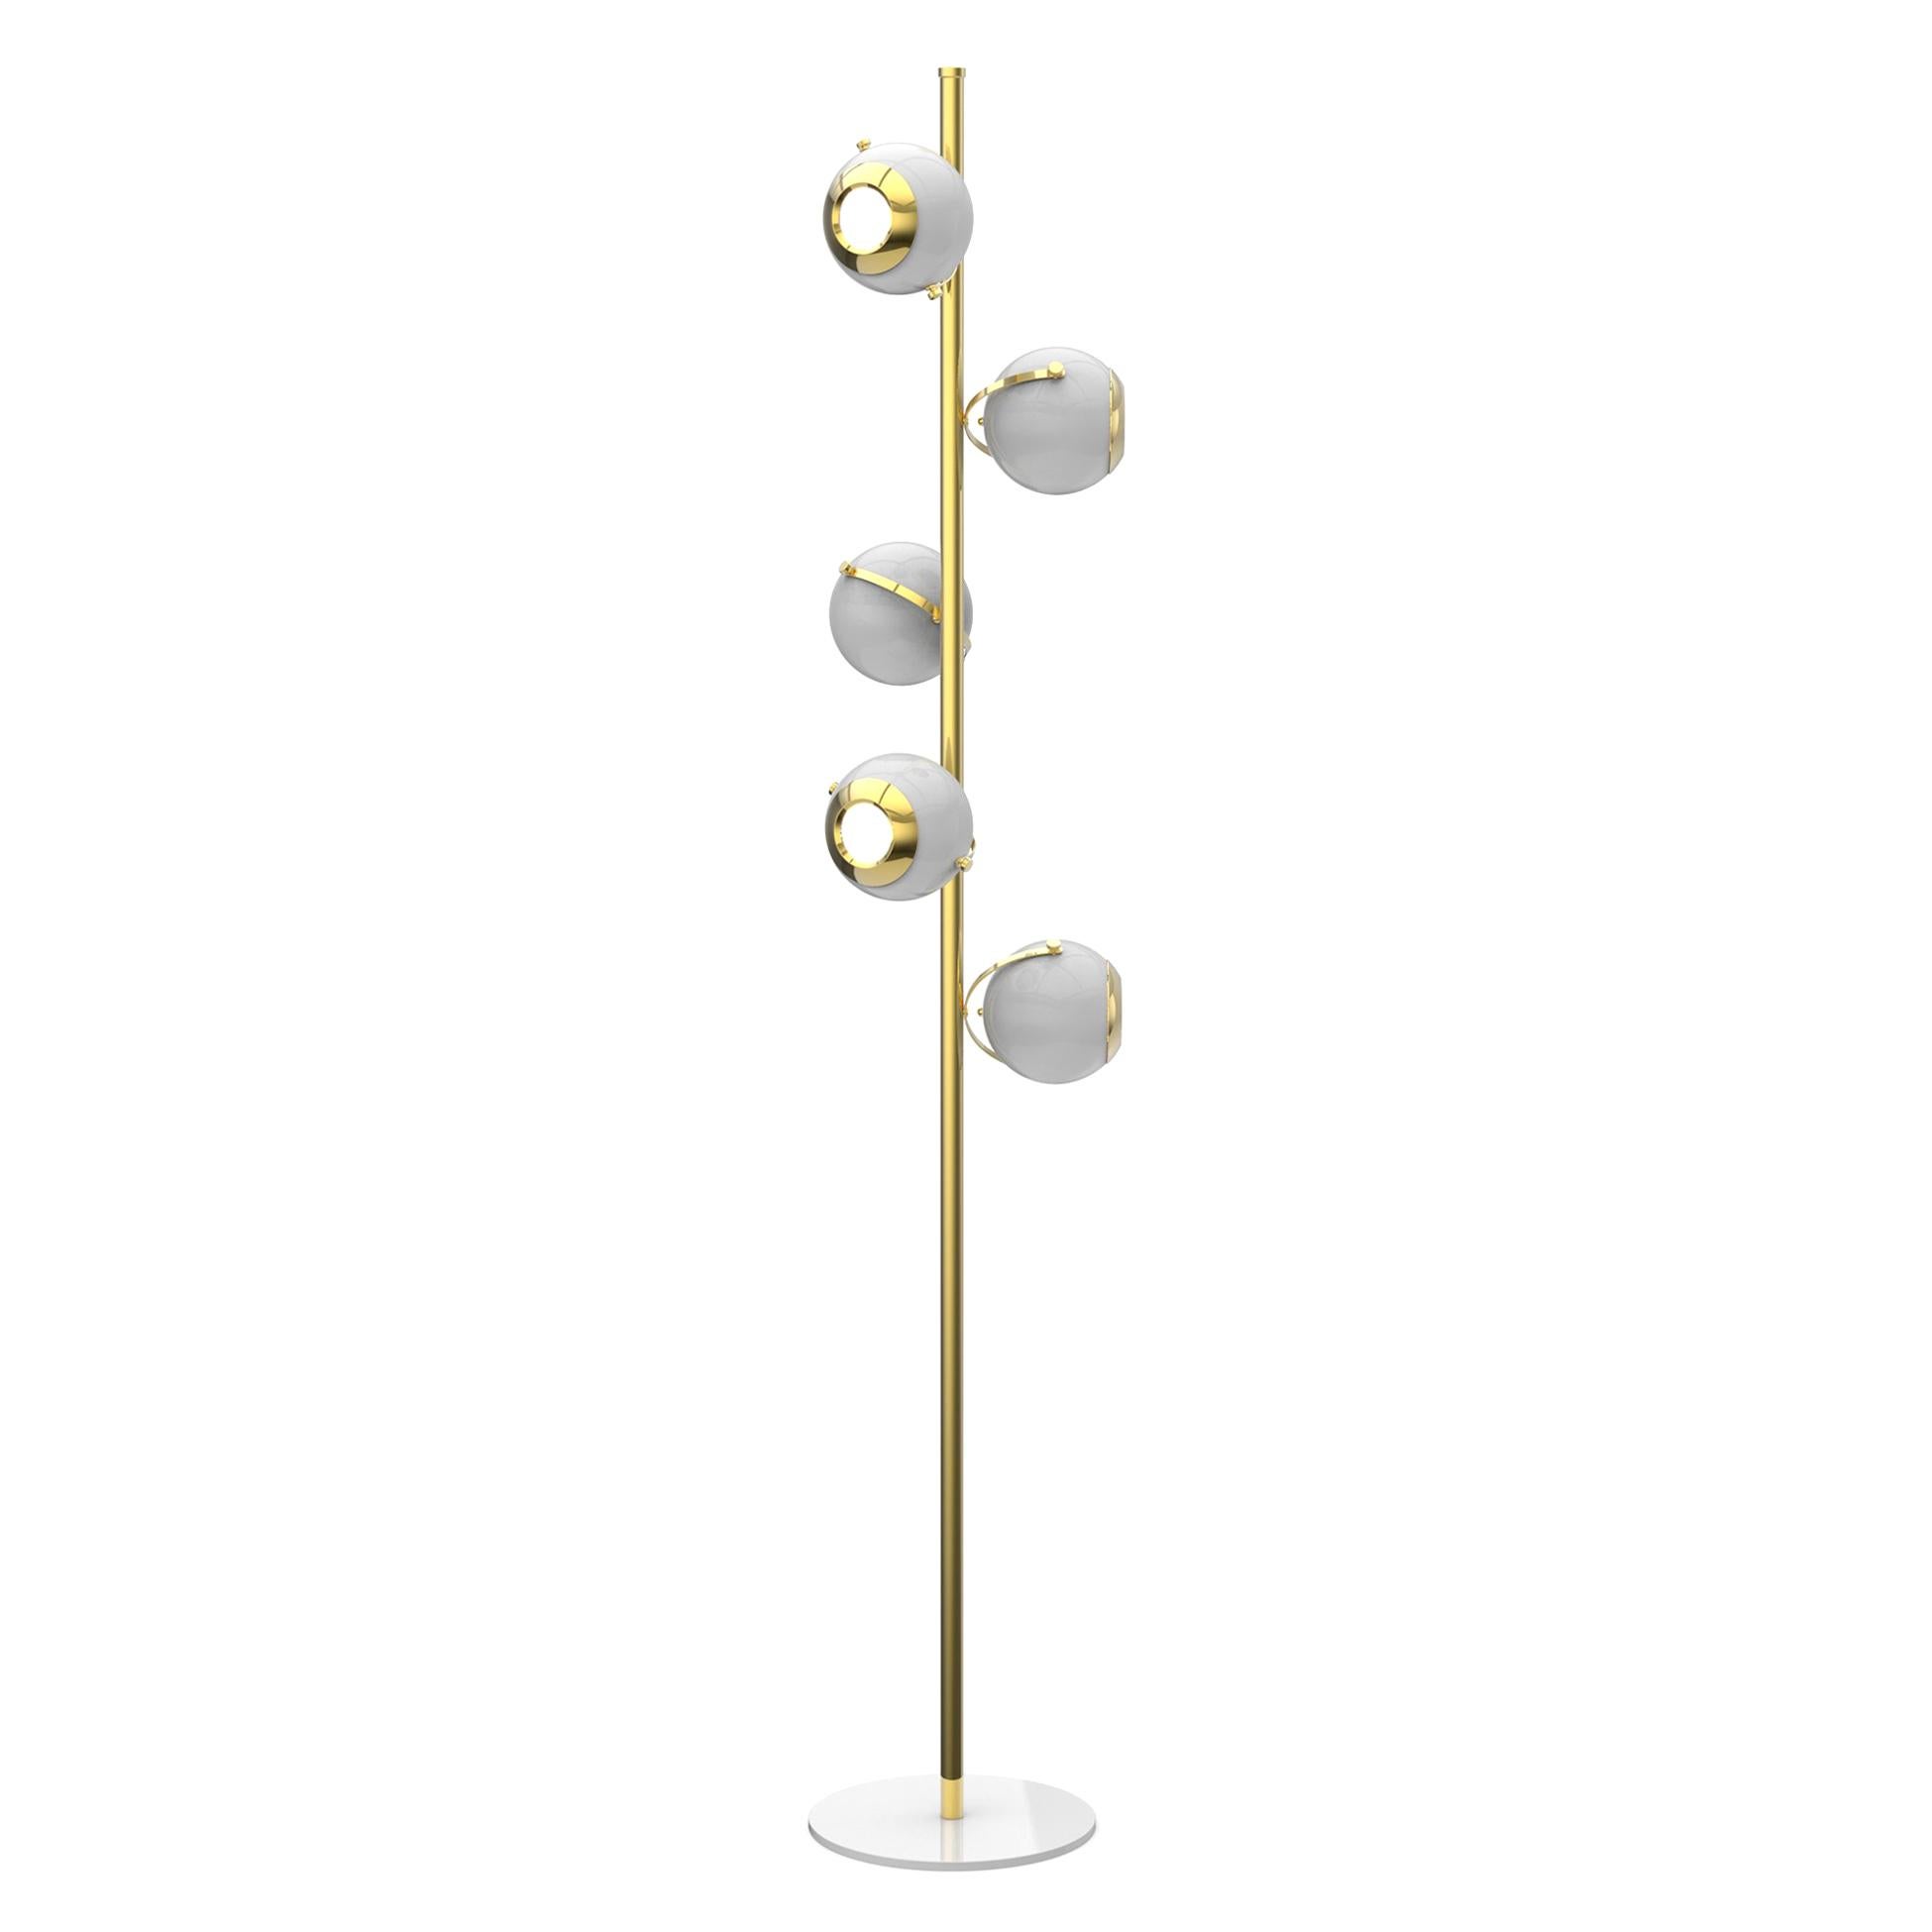 Scofield Floor Lamp in Brass and Gold Details For Sale